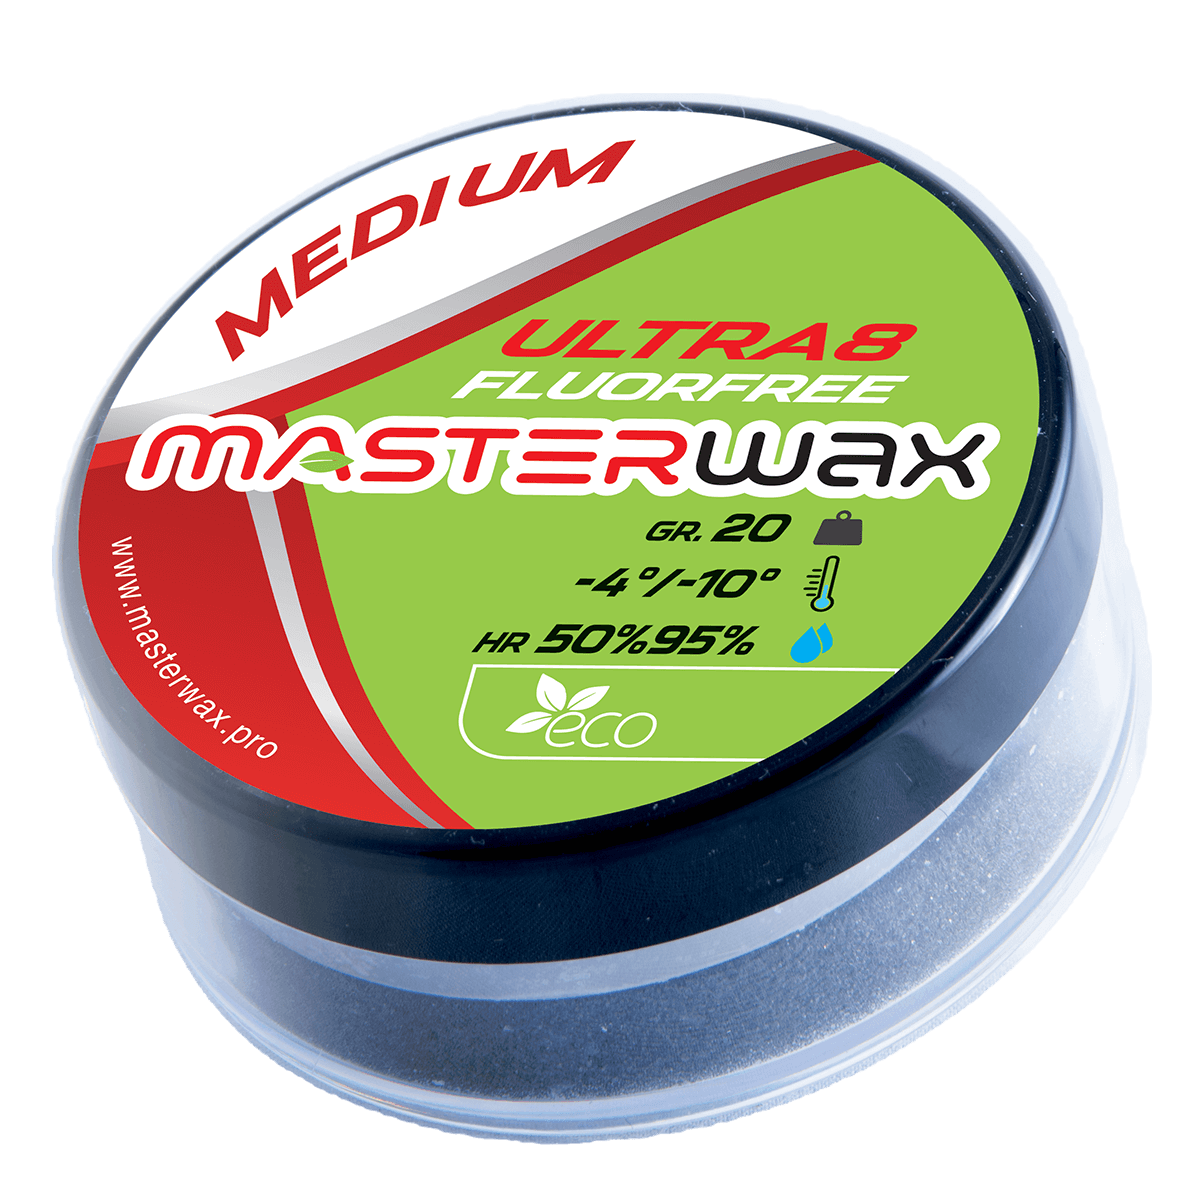 A product picture of the MasterWax Ultra8 FLUORFREE Medium